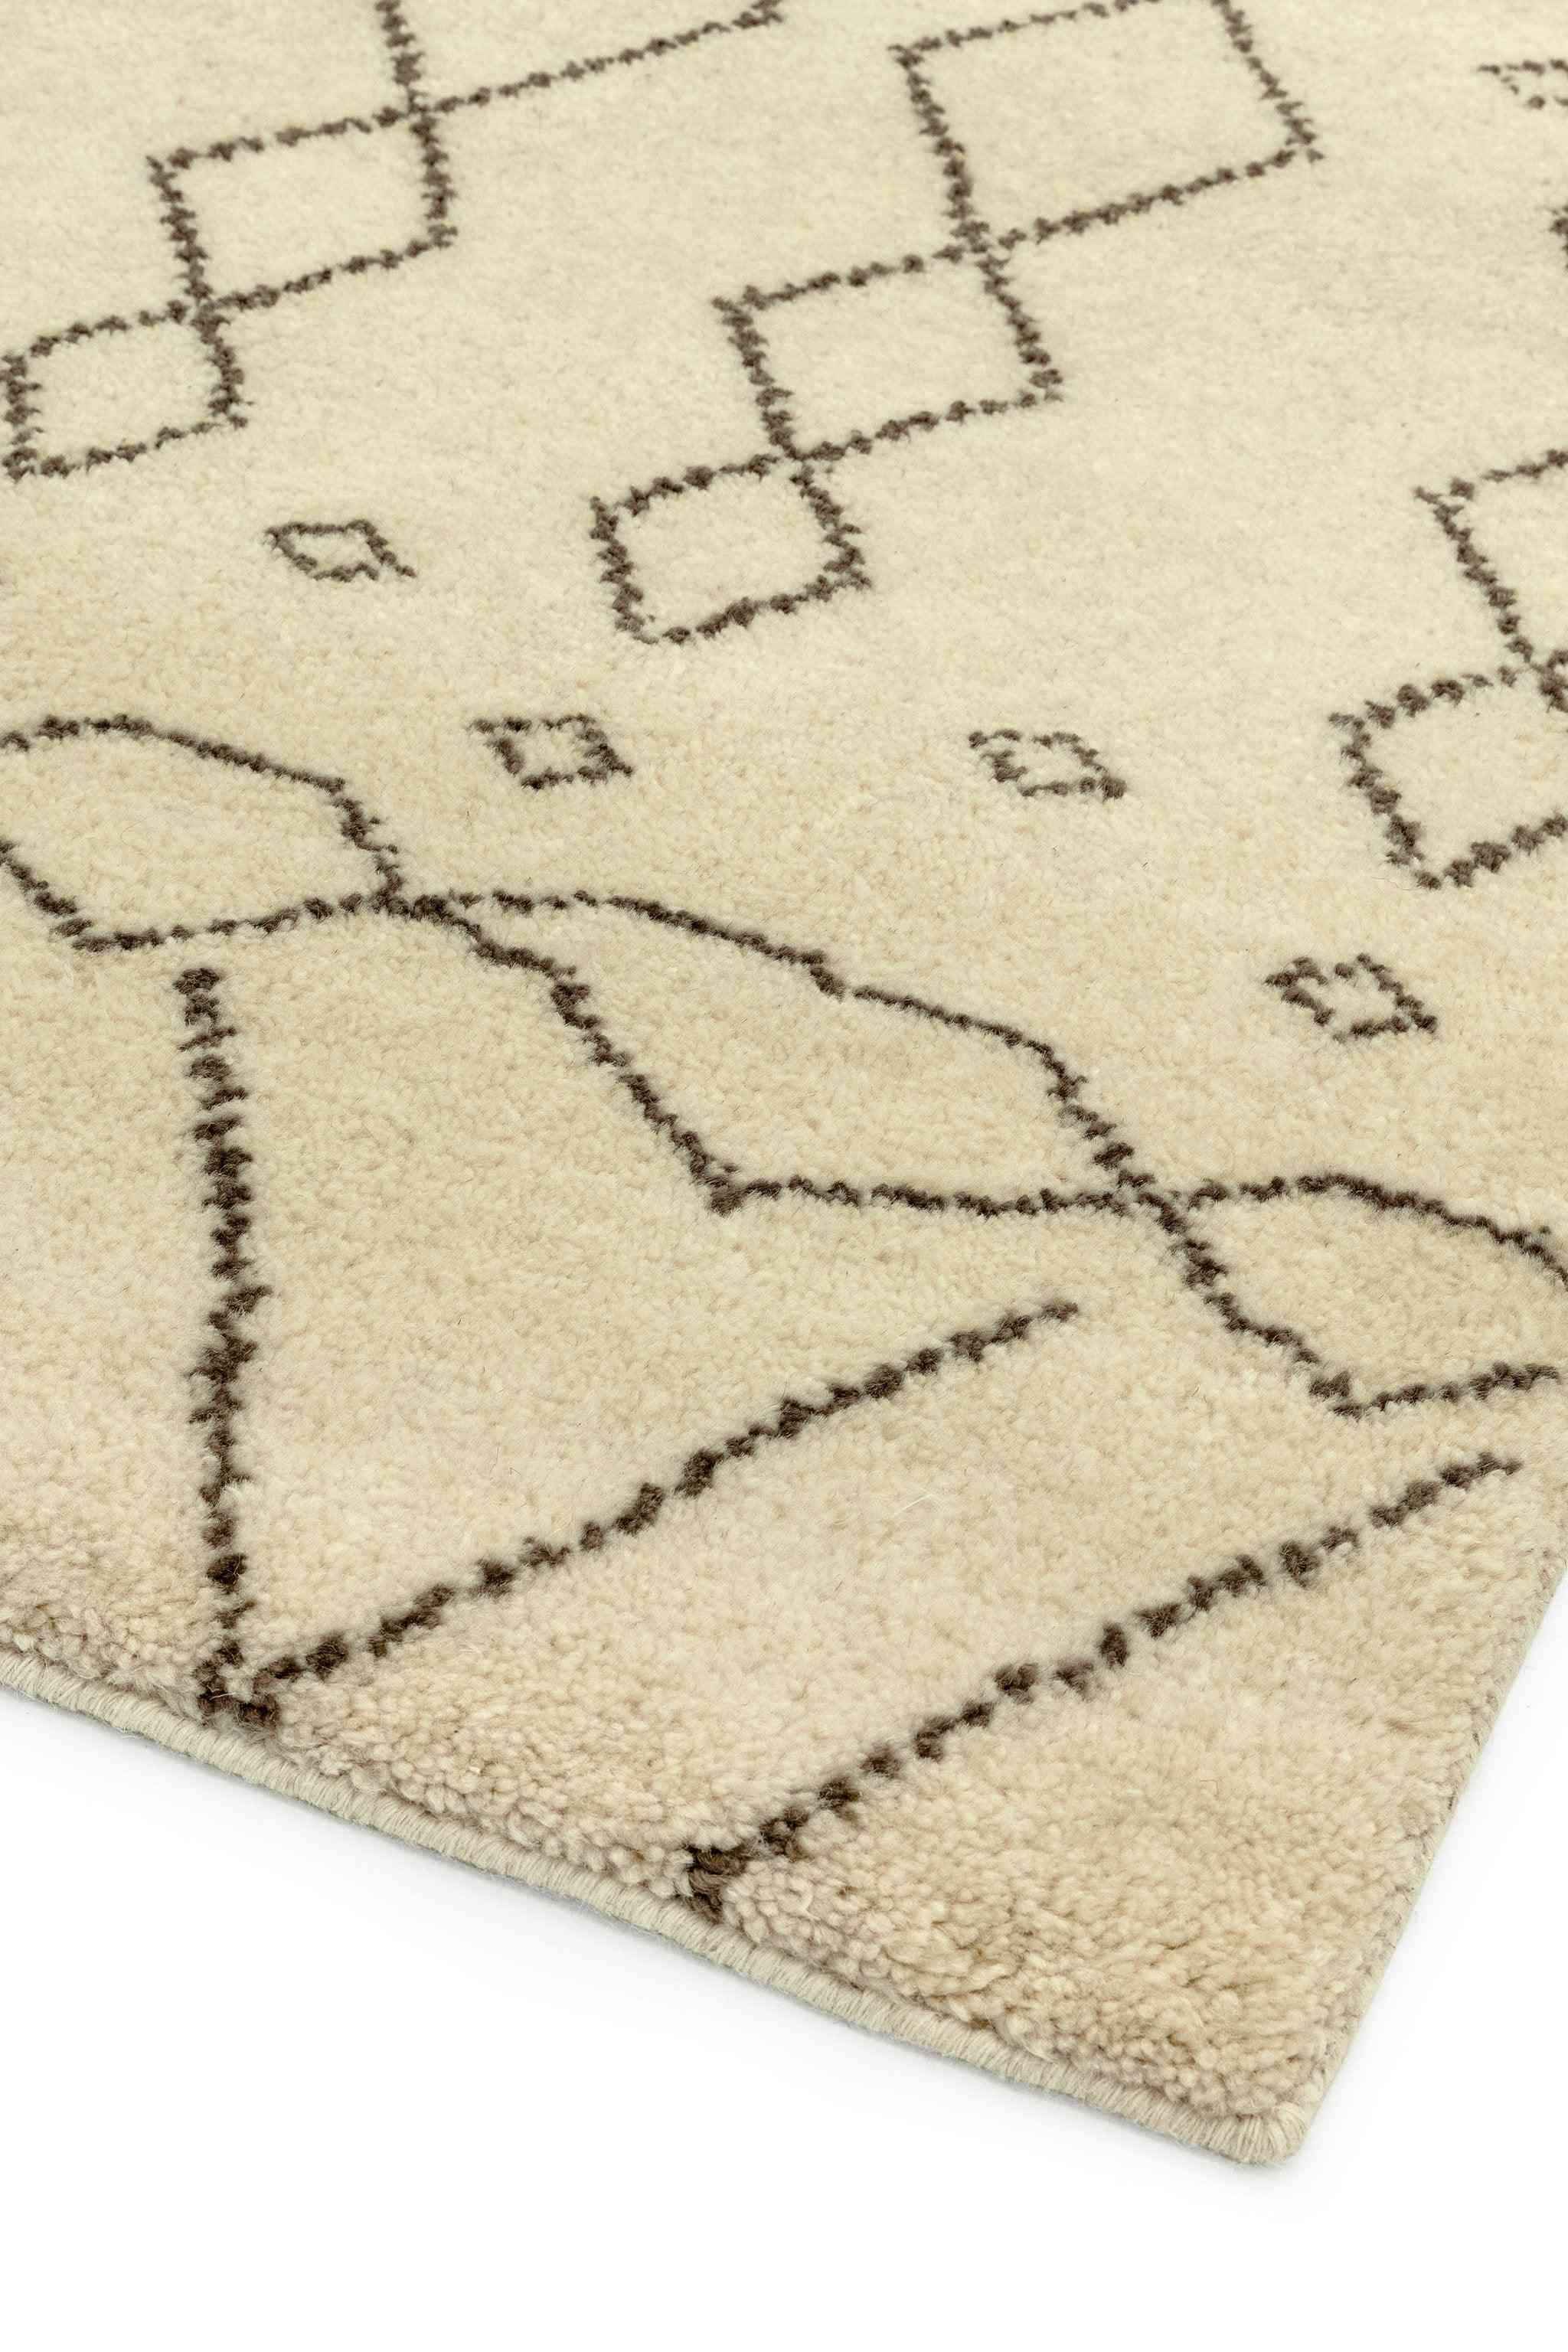 Amira004 Hand knotted Moroccan Berber Wool Tribal White Rug - Rugmaster